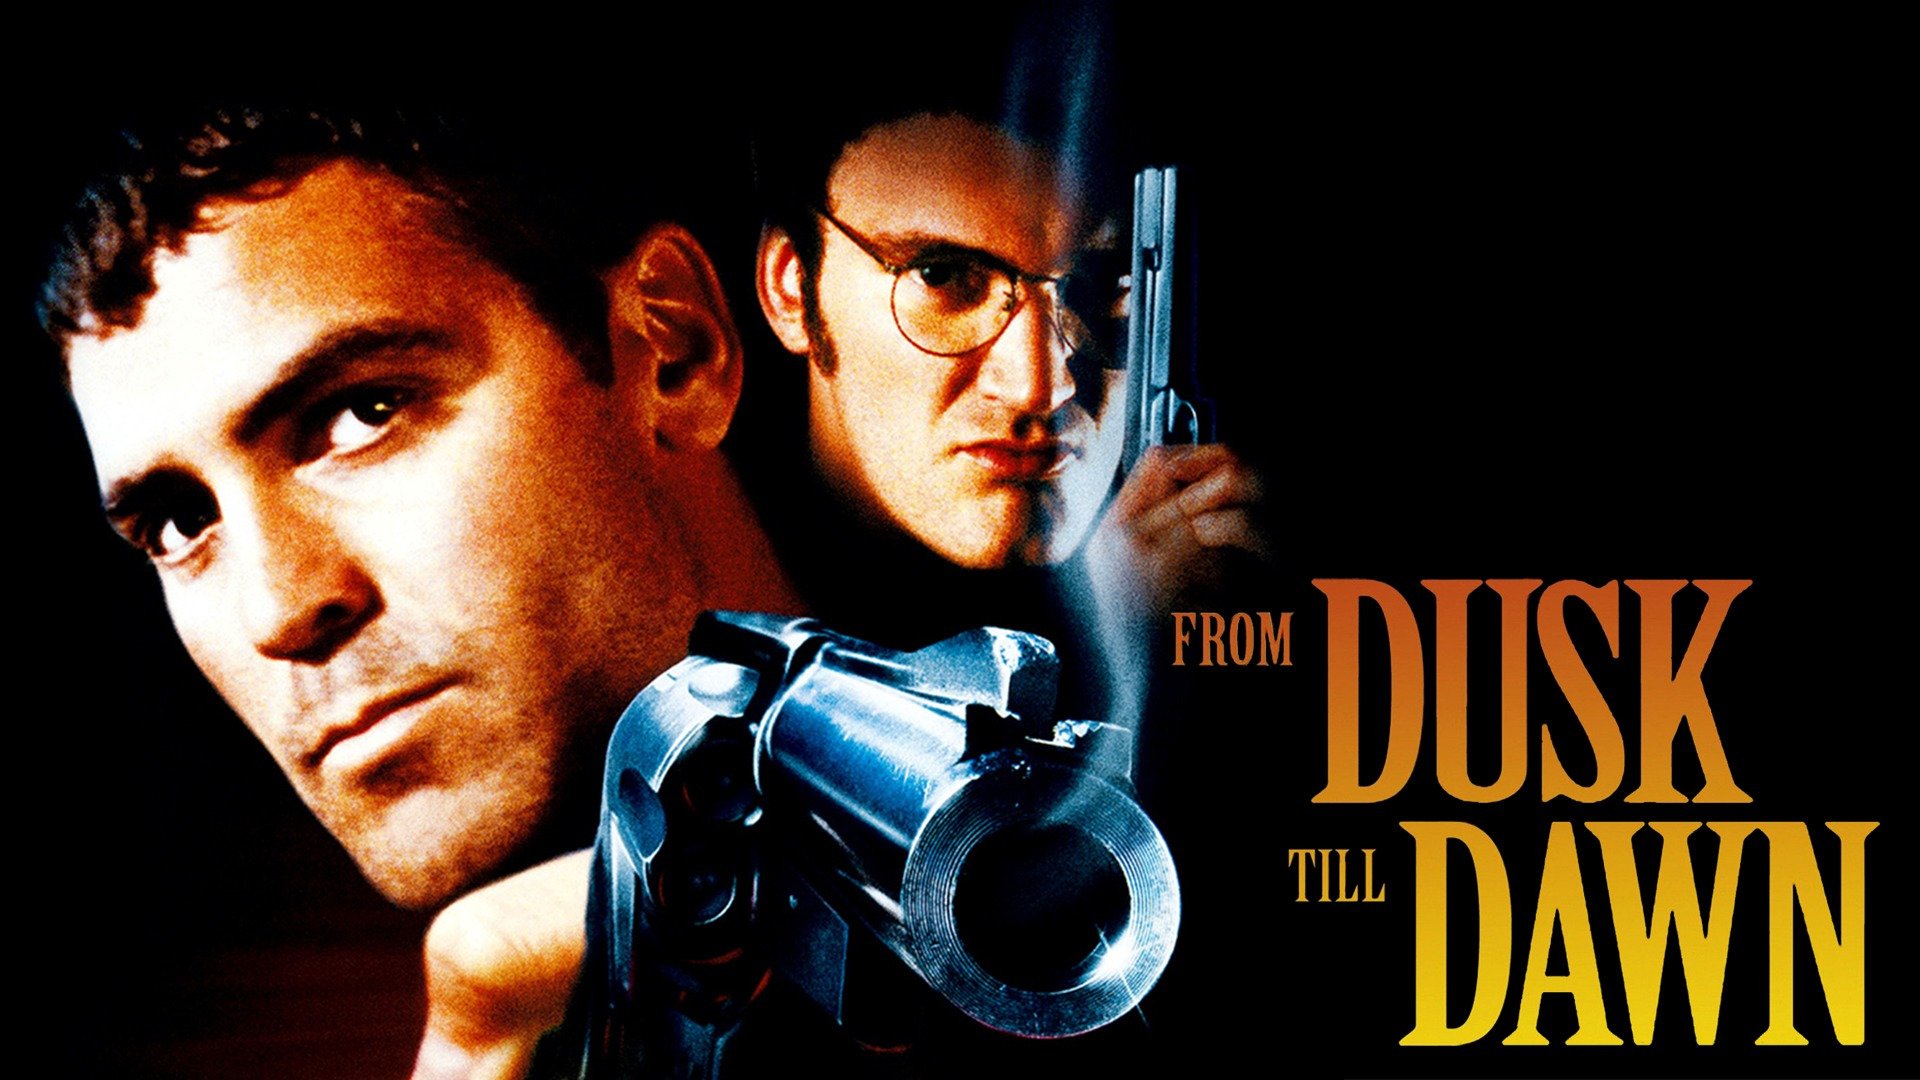 the poster of 'from dusk till dawn', with george clooney and tarantino